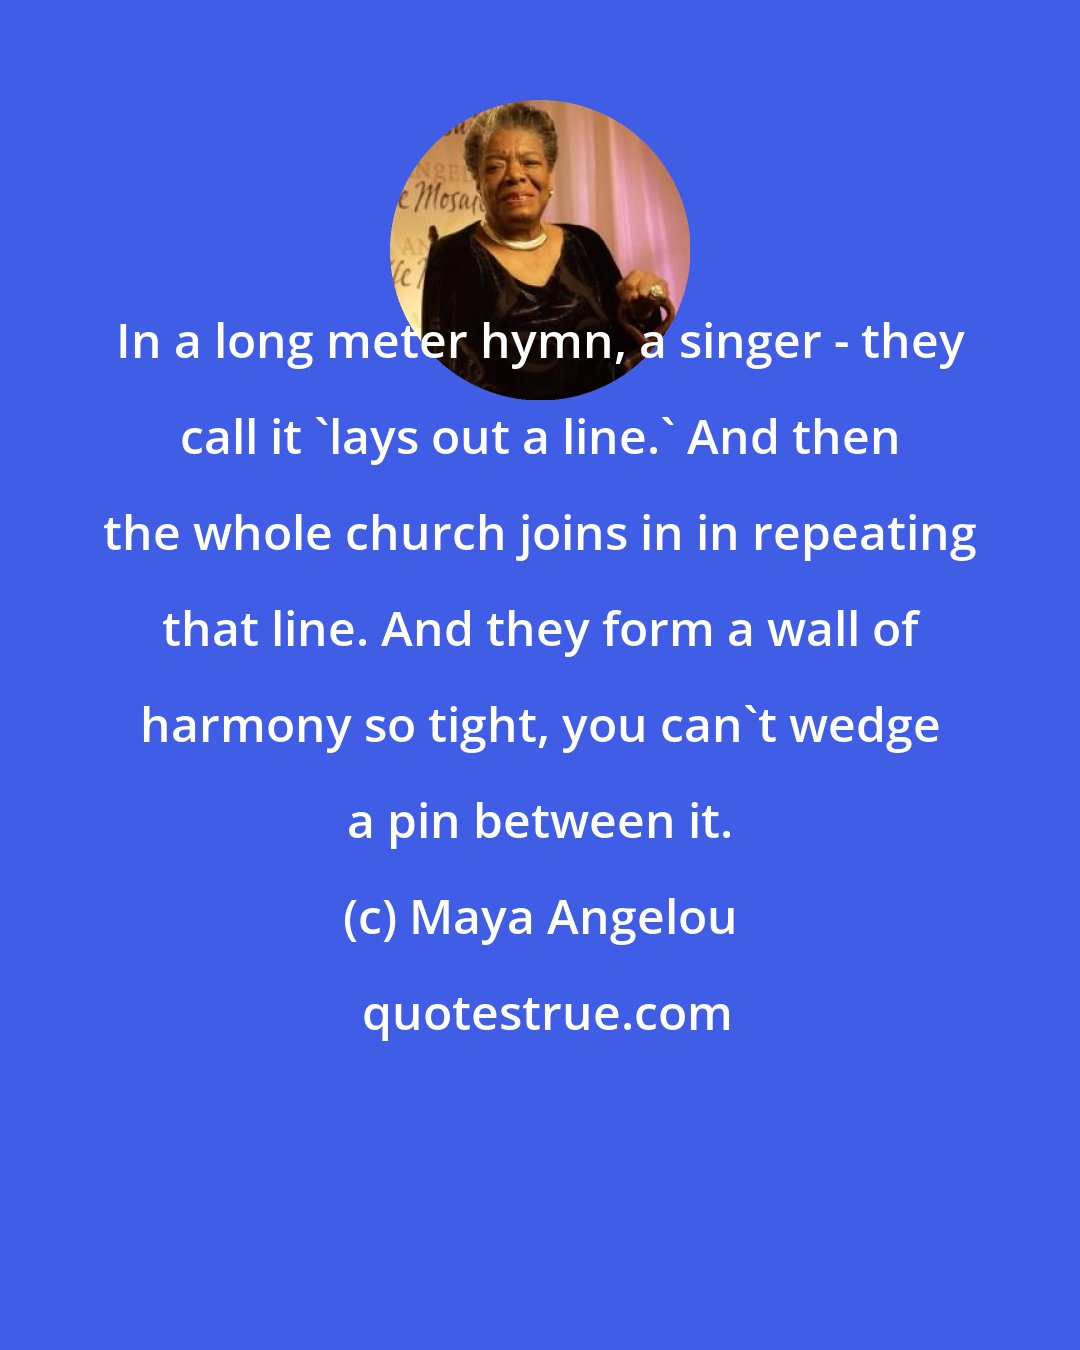 Maya Angelou: In a long meter hymn, a singer - they call it 'lays out a line.' And then the whole church joins in in repeating that line. And they form a wall of harmony so tight, you can't wedge a pin between it.